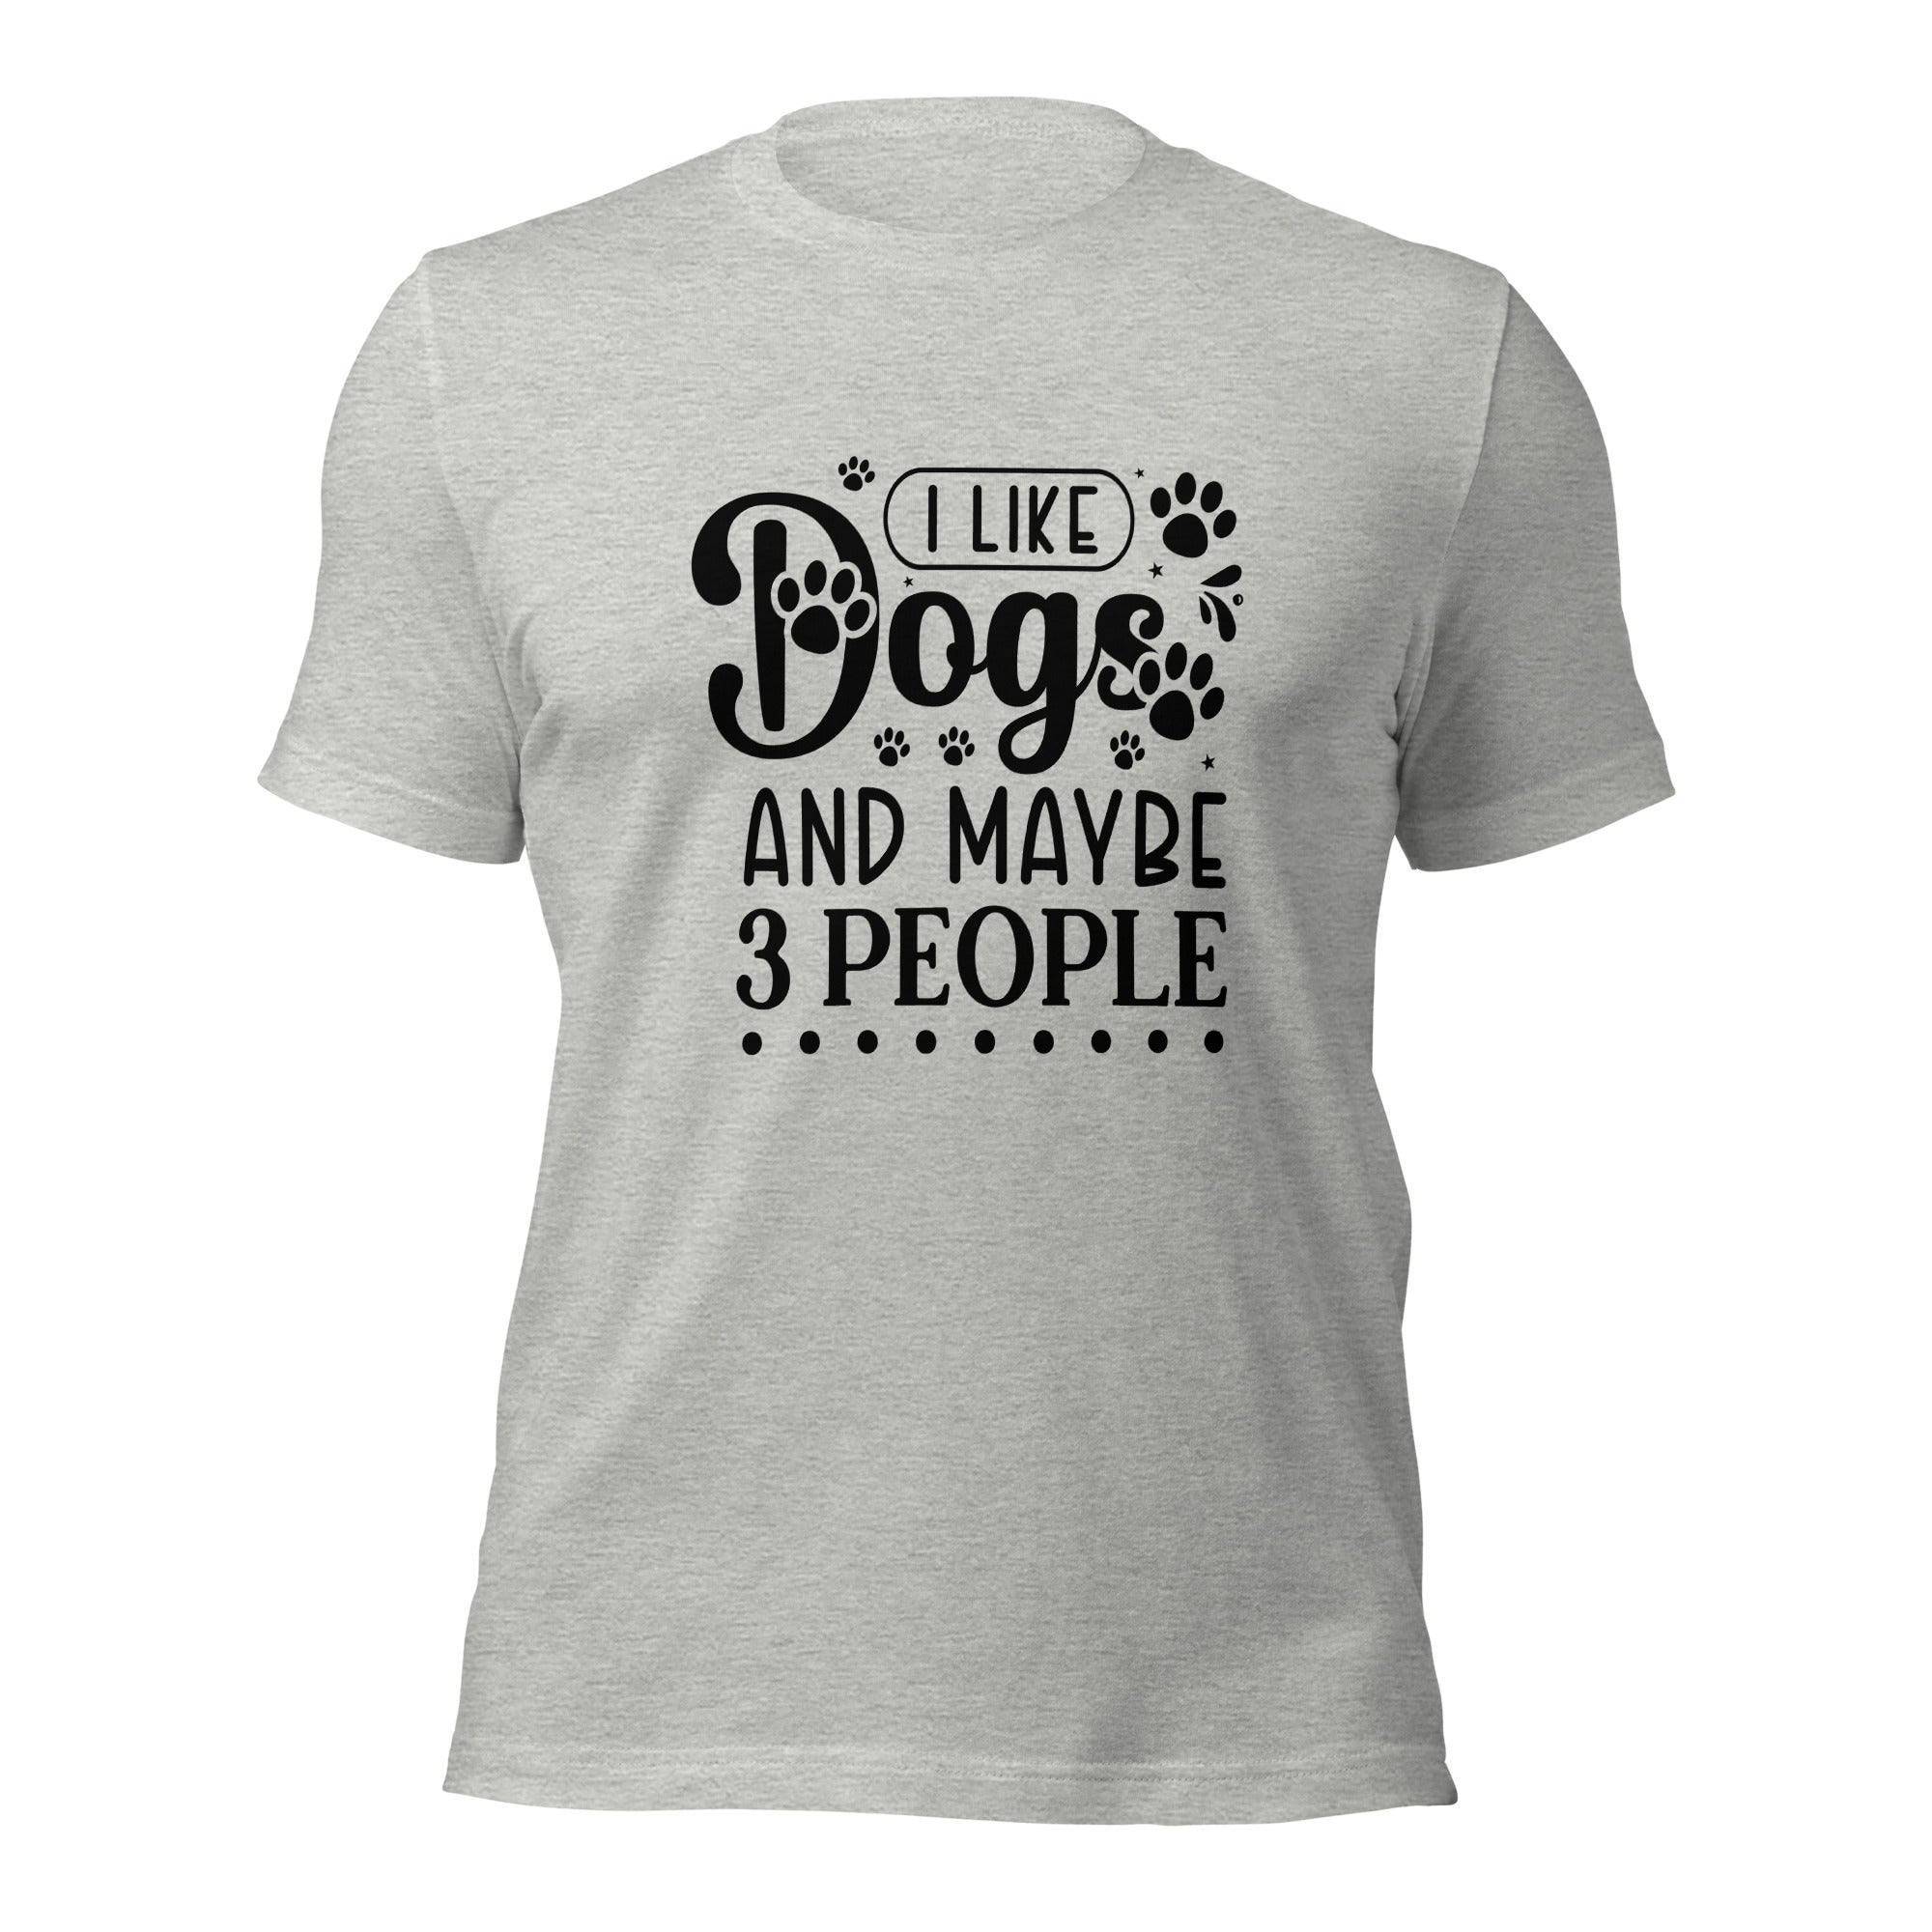 Unisex t-shirt- I Like Dogs And Maybe 3 People